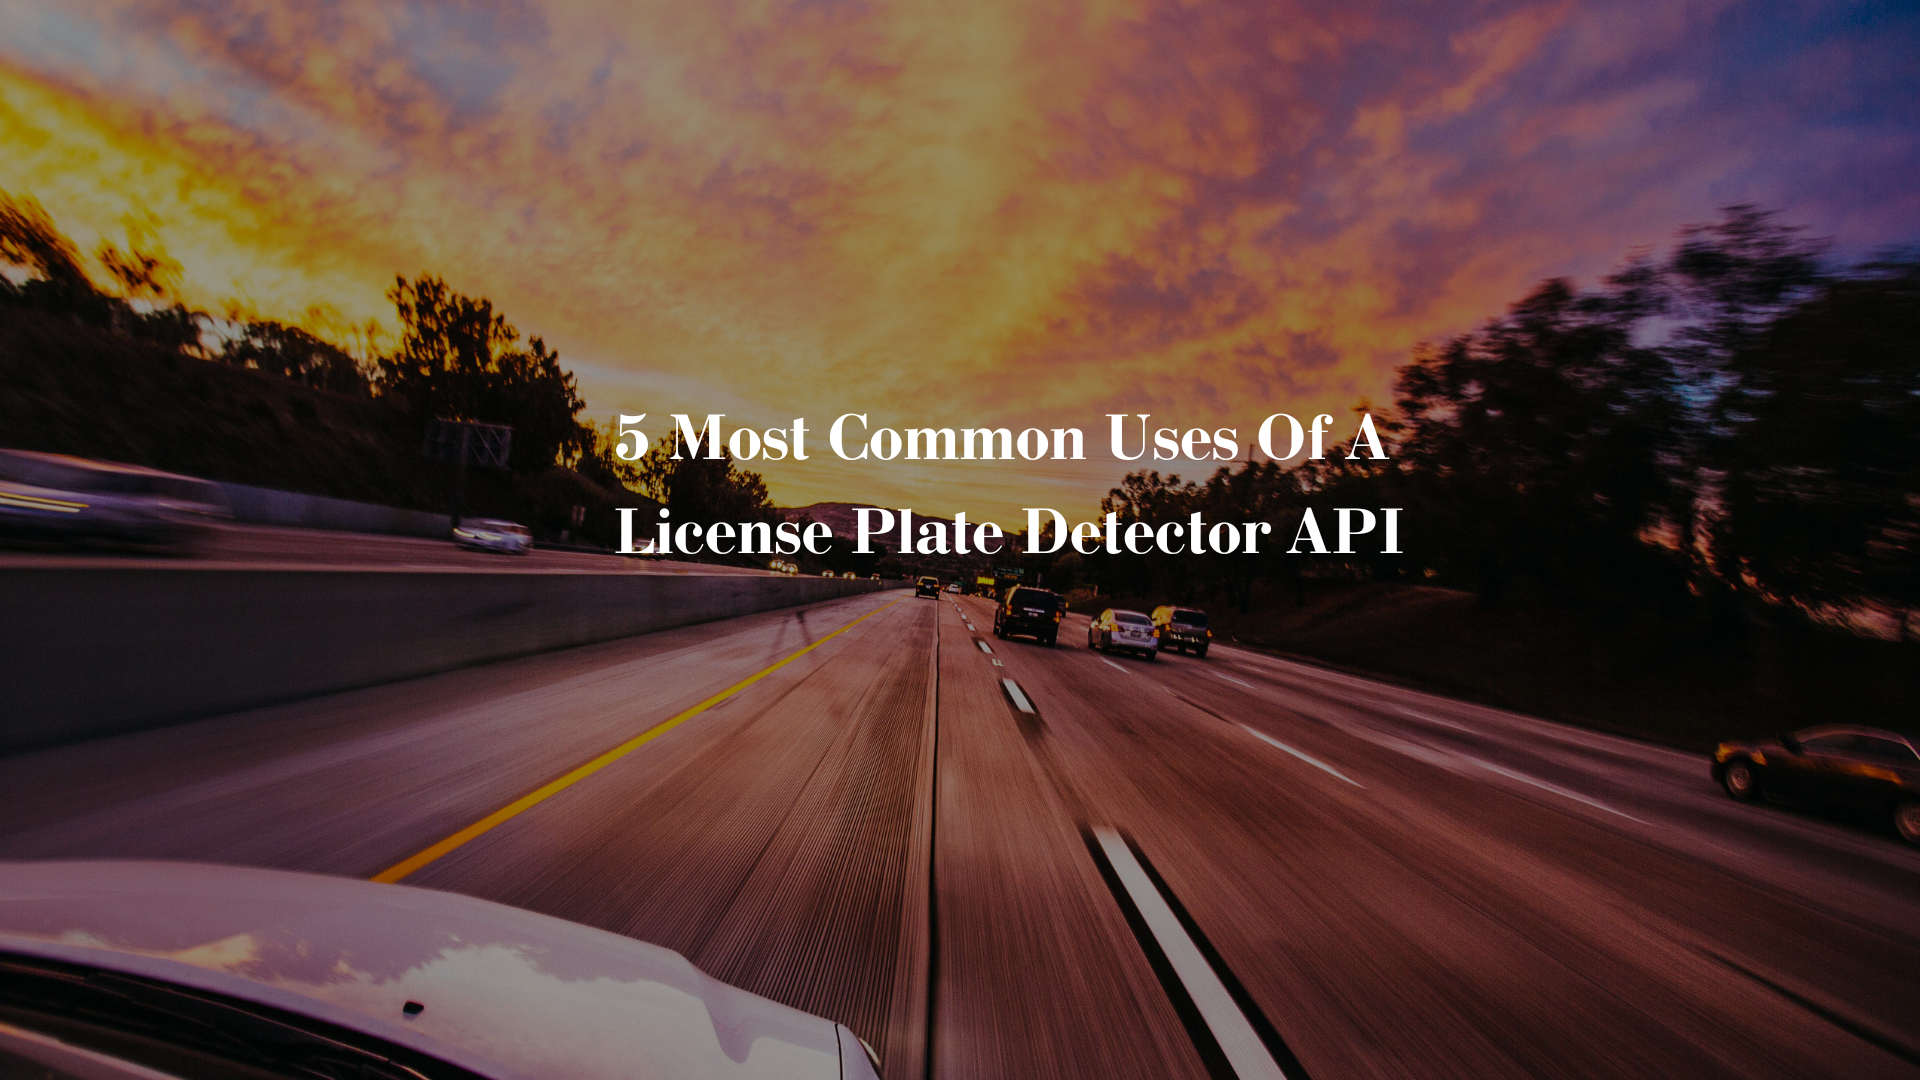 5 Most Common Uses Of A License Plate Detector API